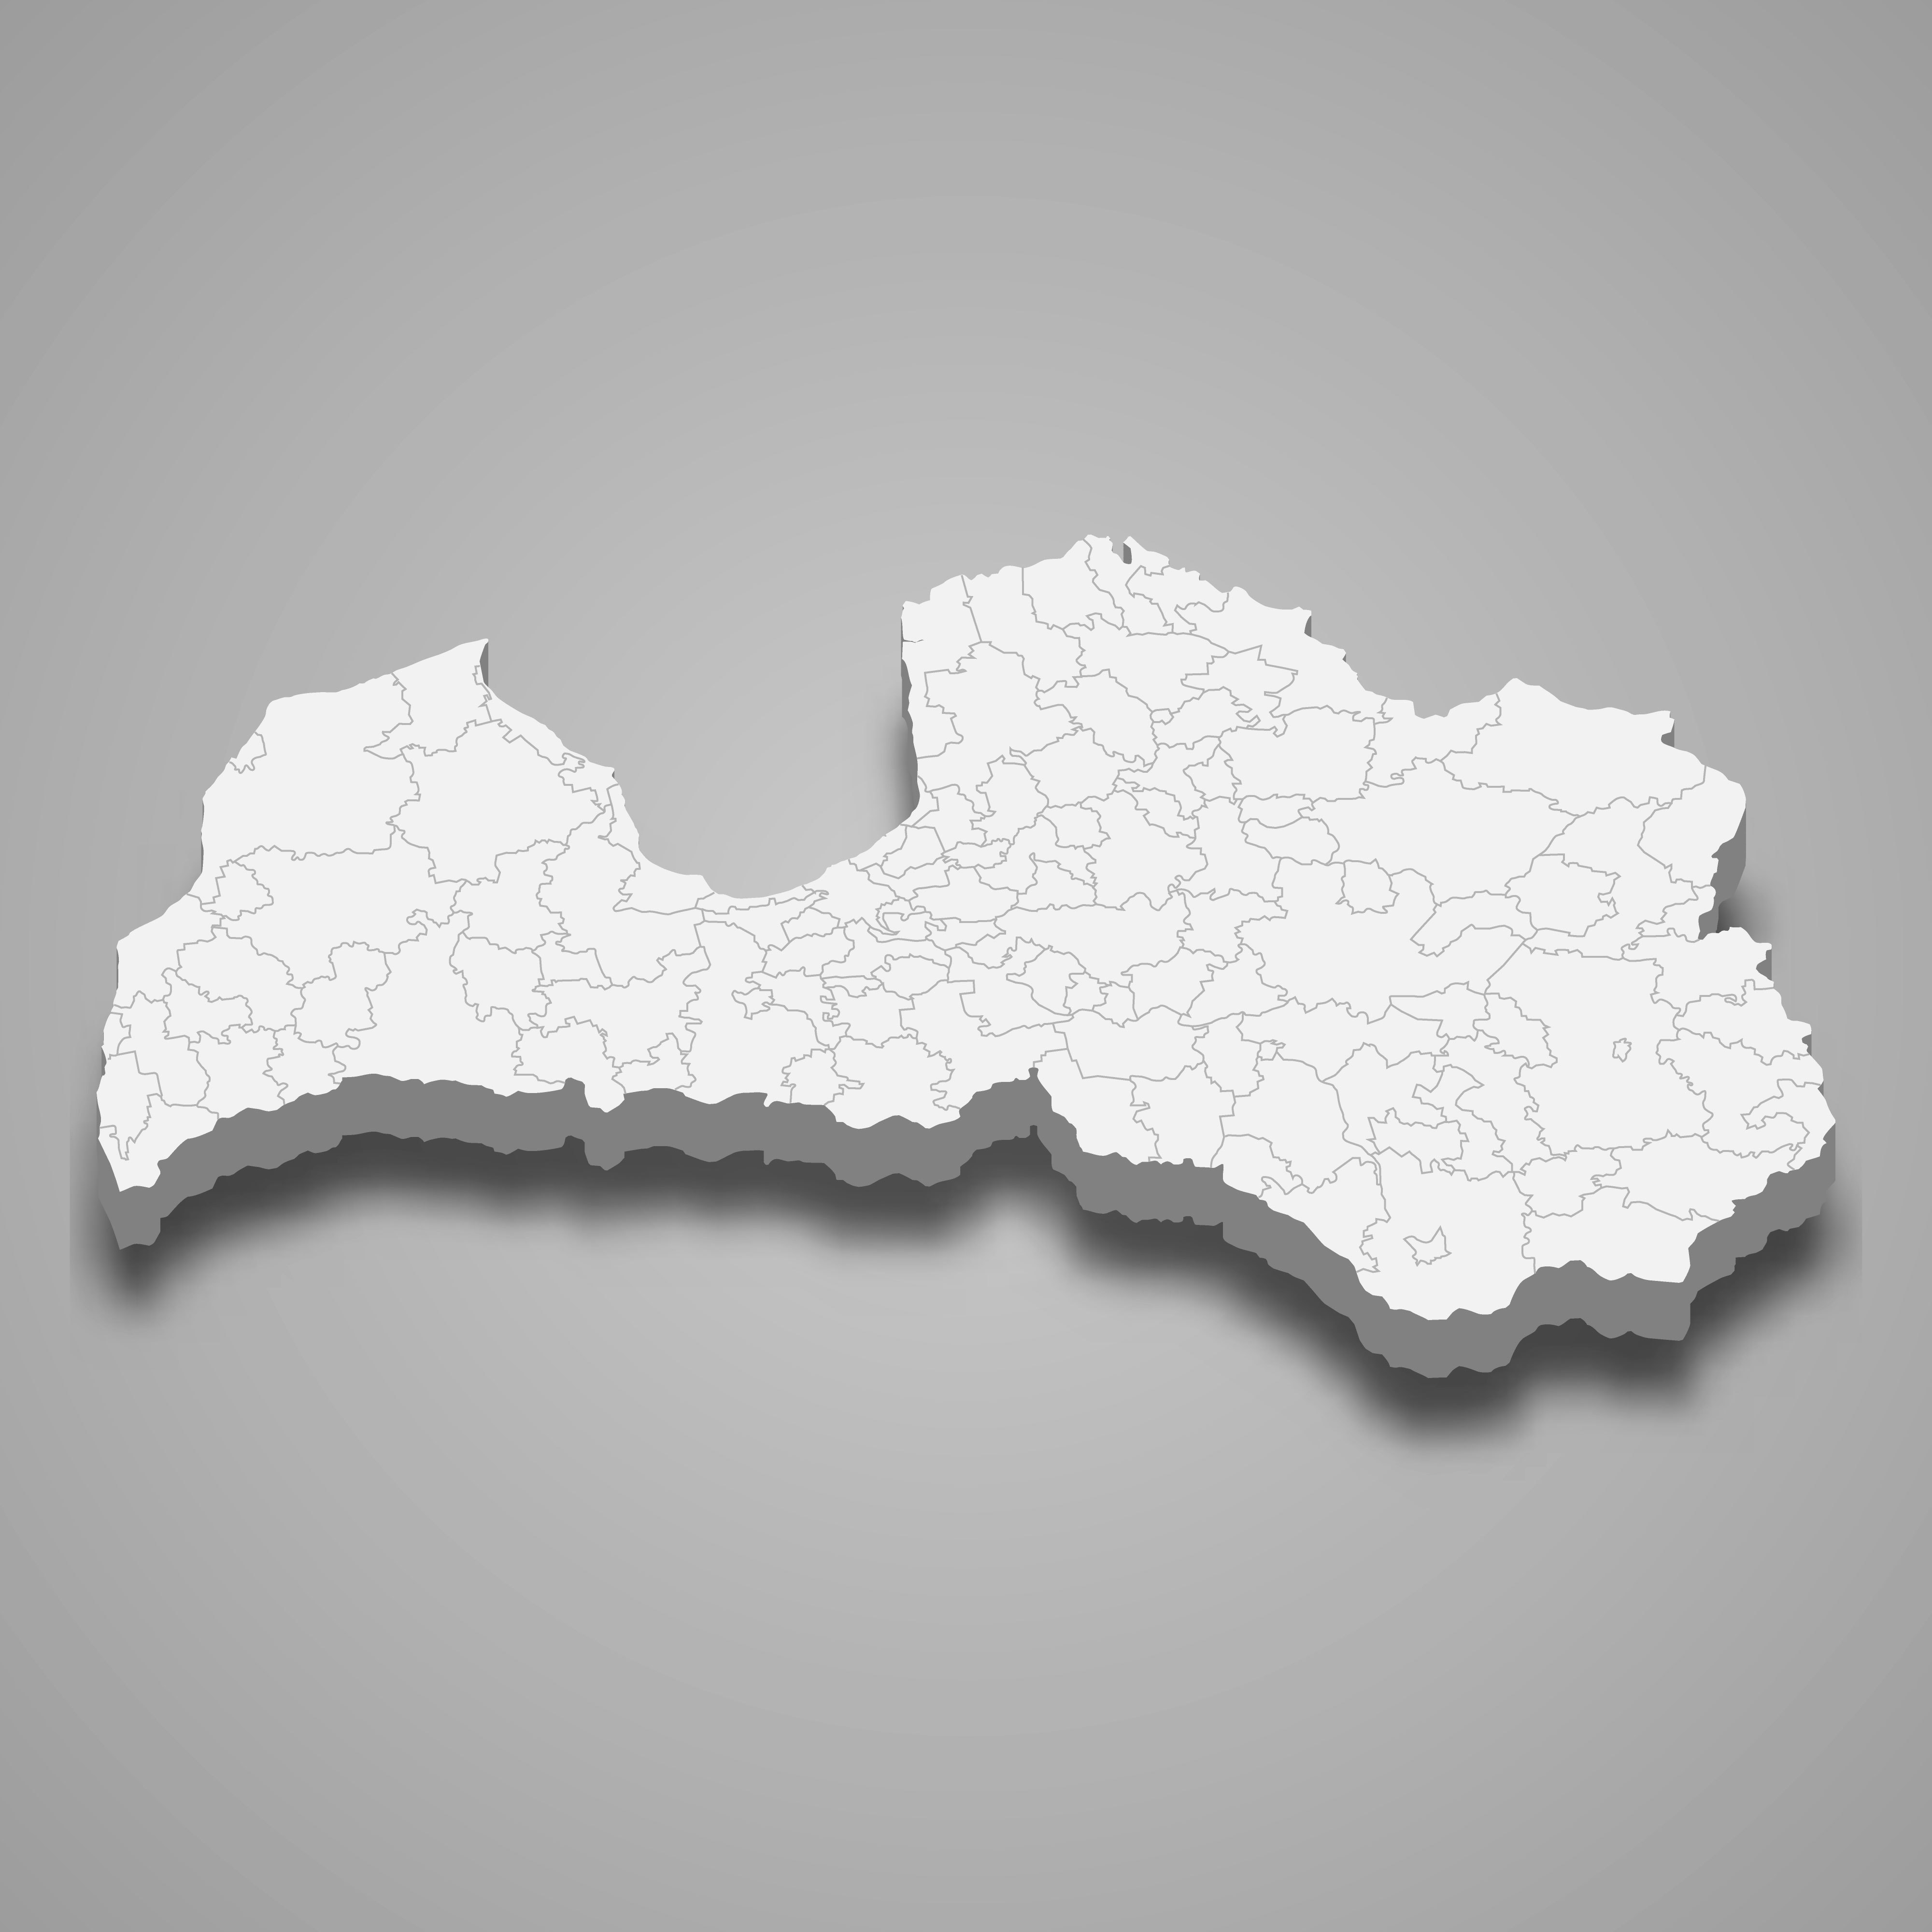 3d map of Latvia with borders of regions. 3d map with borders Template for your design